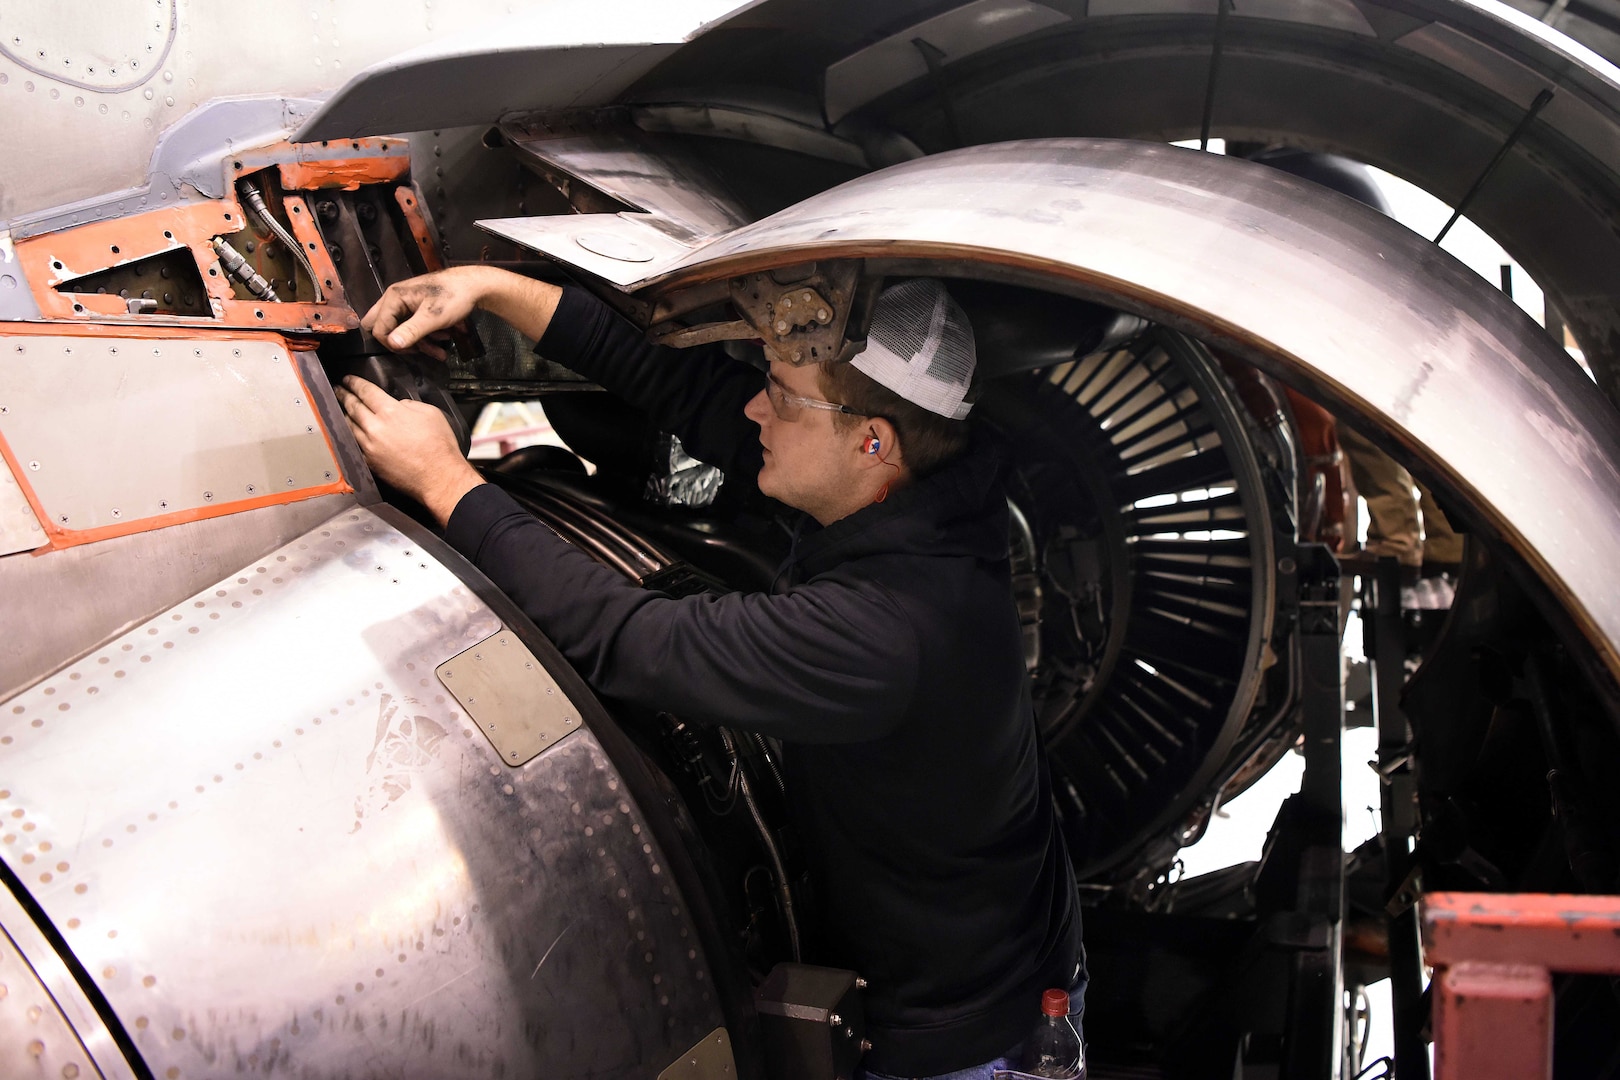 A man works on the engine of an aircraft.